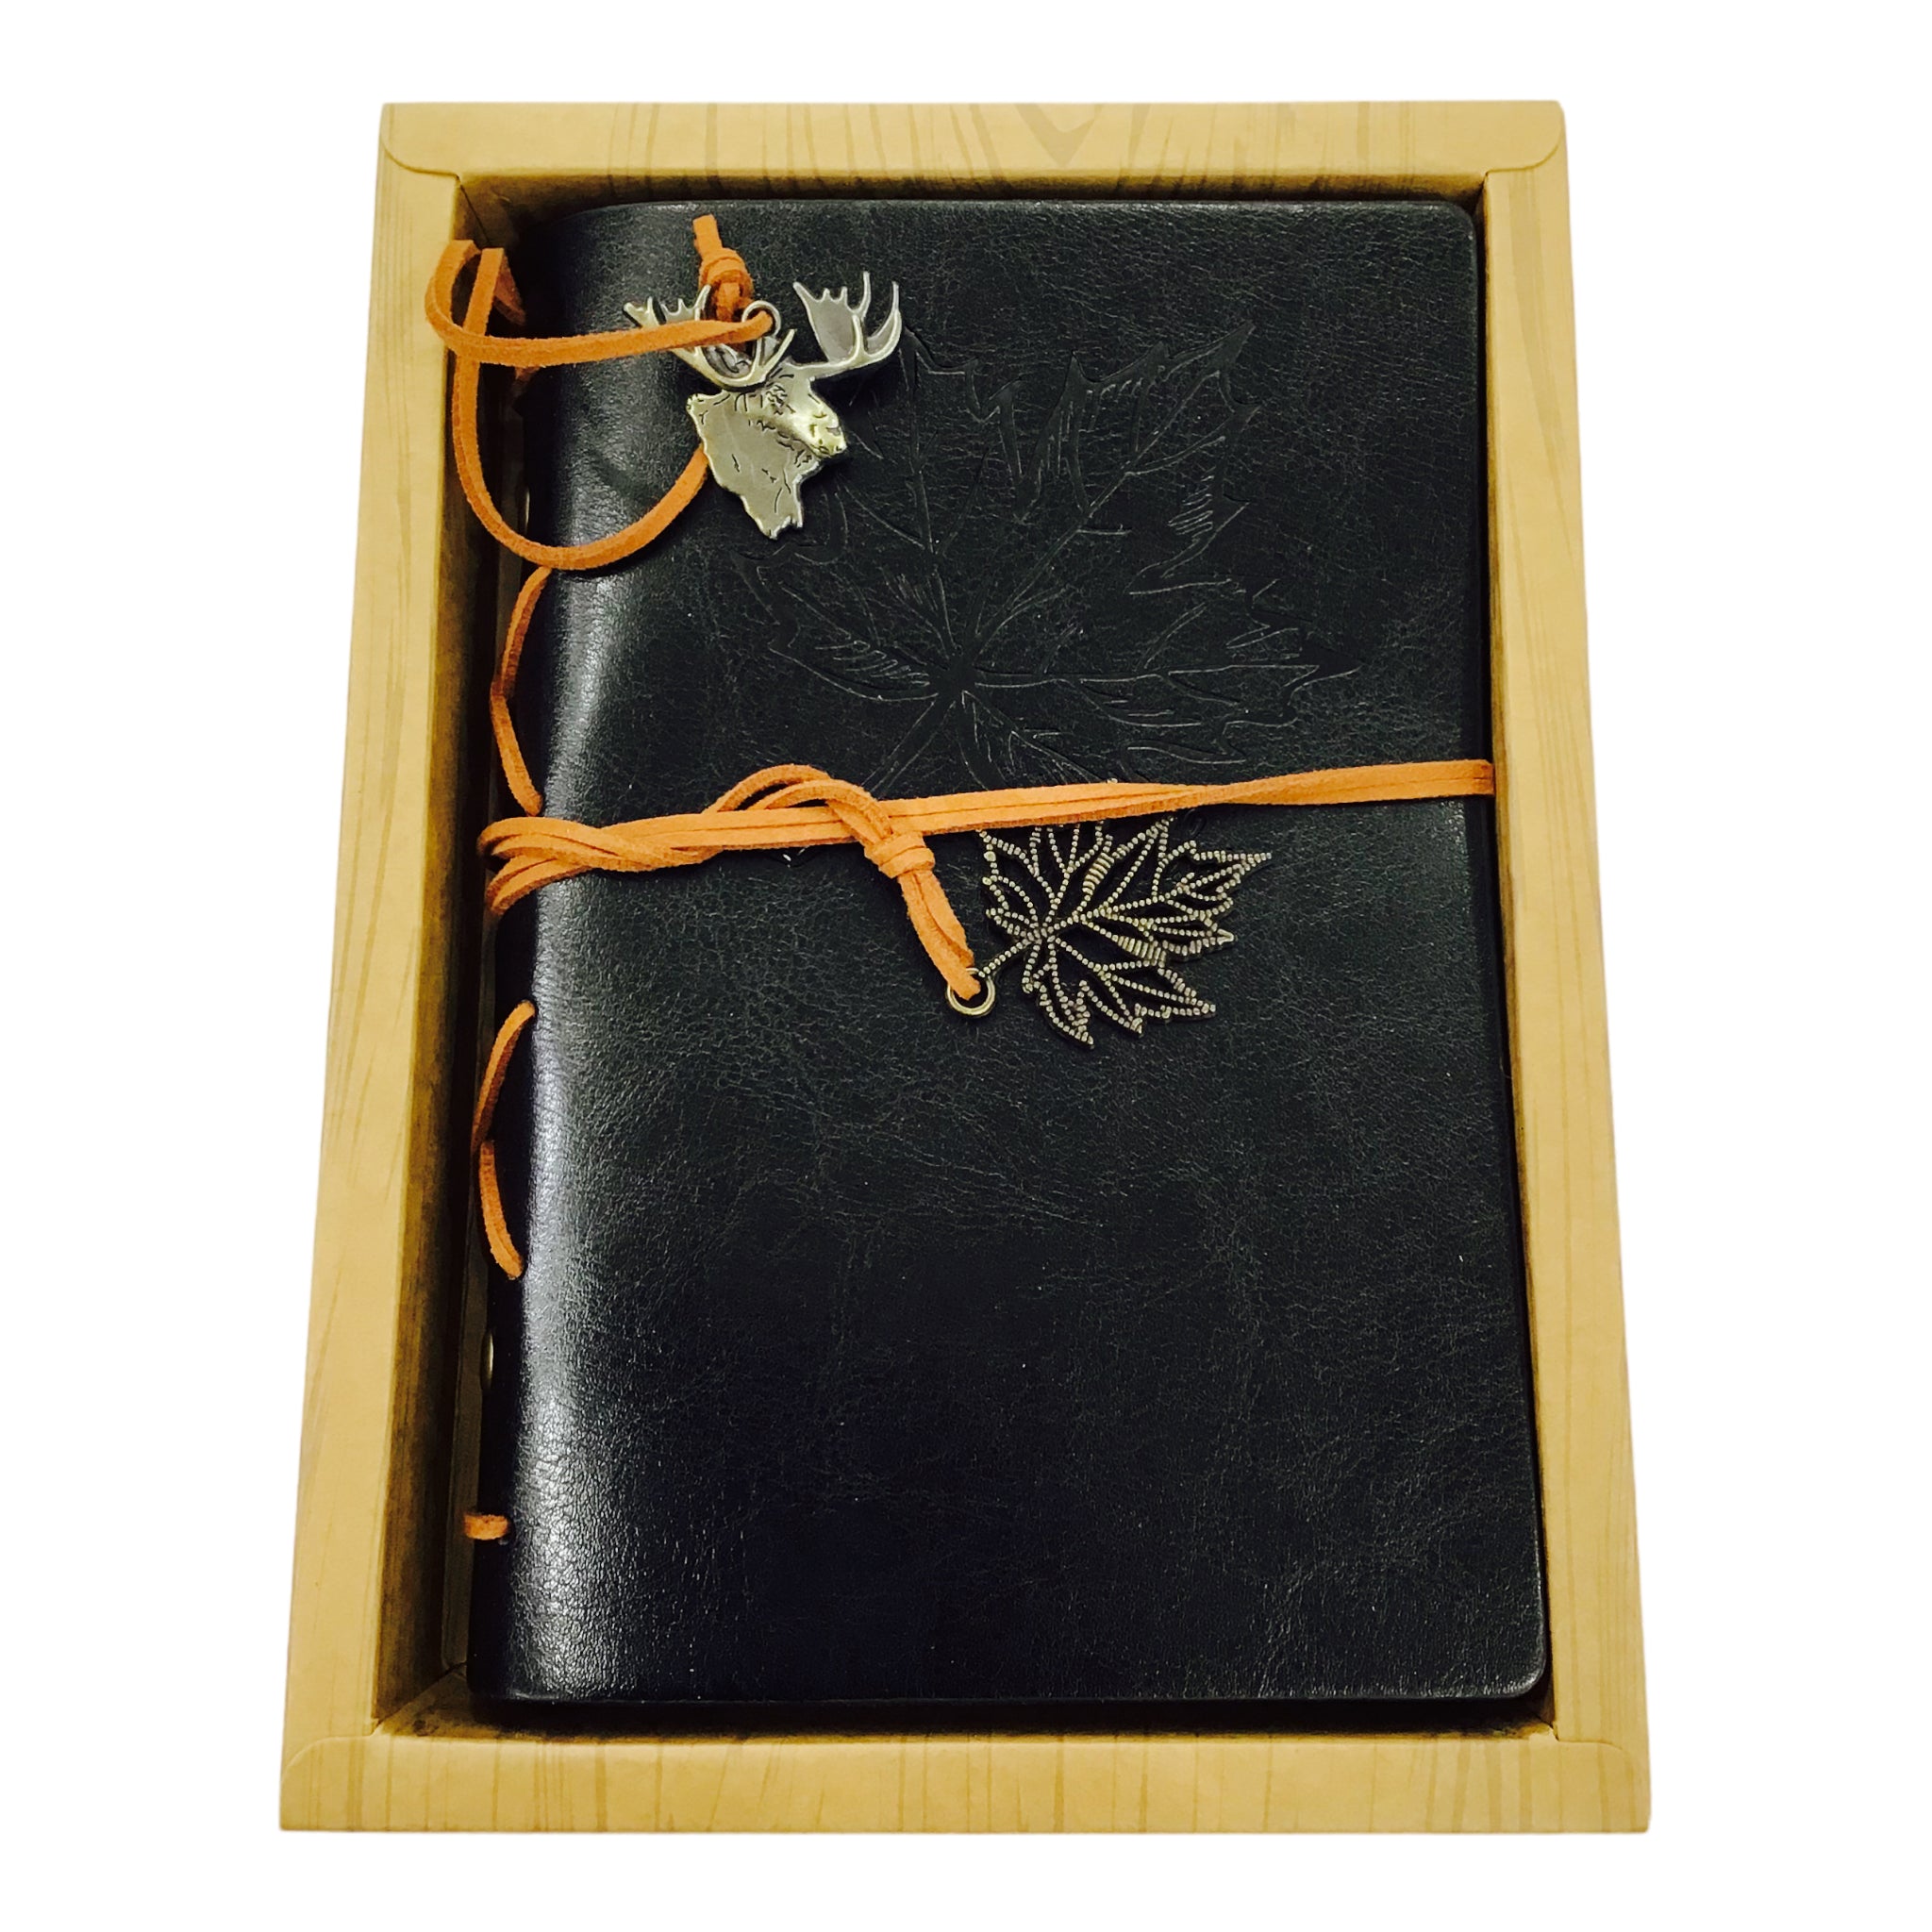 CANADA EMBOSSED JOURNAL - REFILLABLE 80 SHEETS / 160 PAGES | ATTACHED BOOKMARK WITH CHARM - BUSINESS CARD SLOTS - FAUX LEATHER MATERIAL